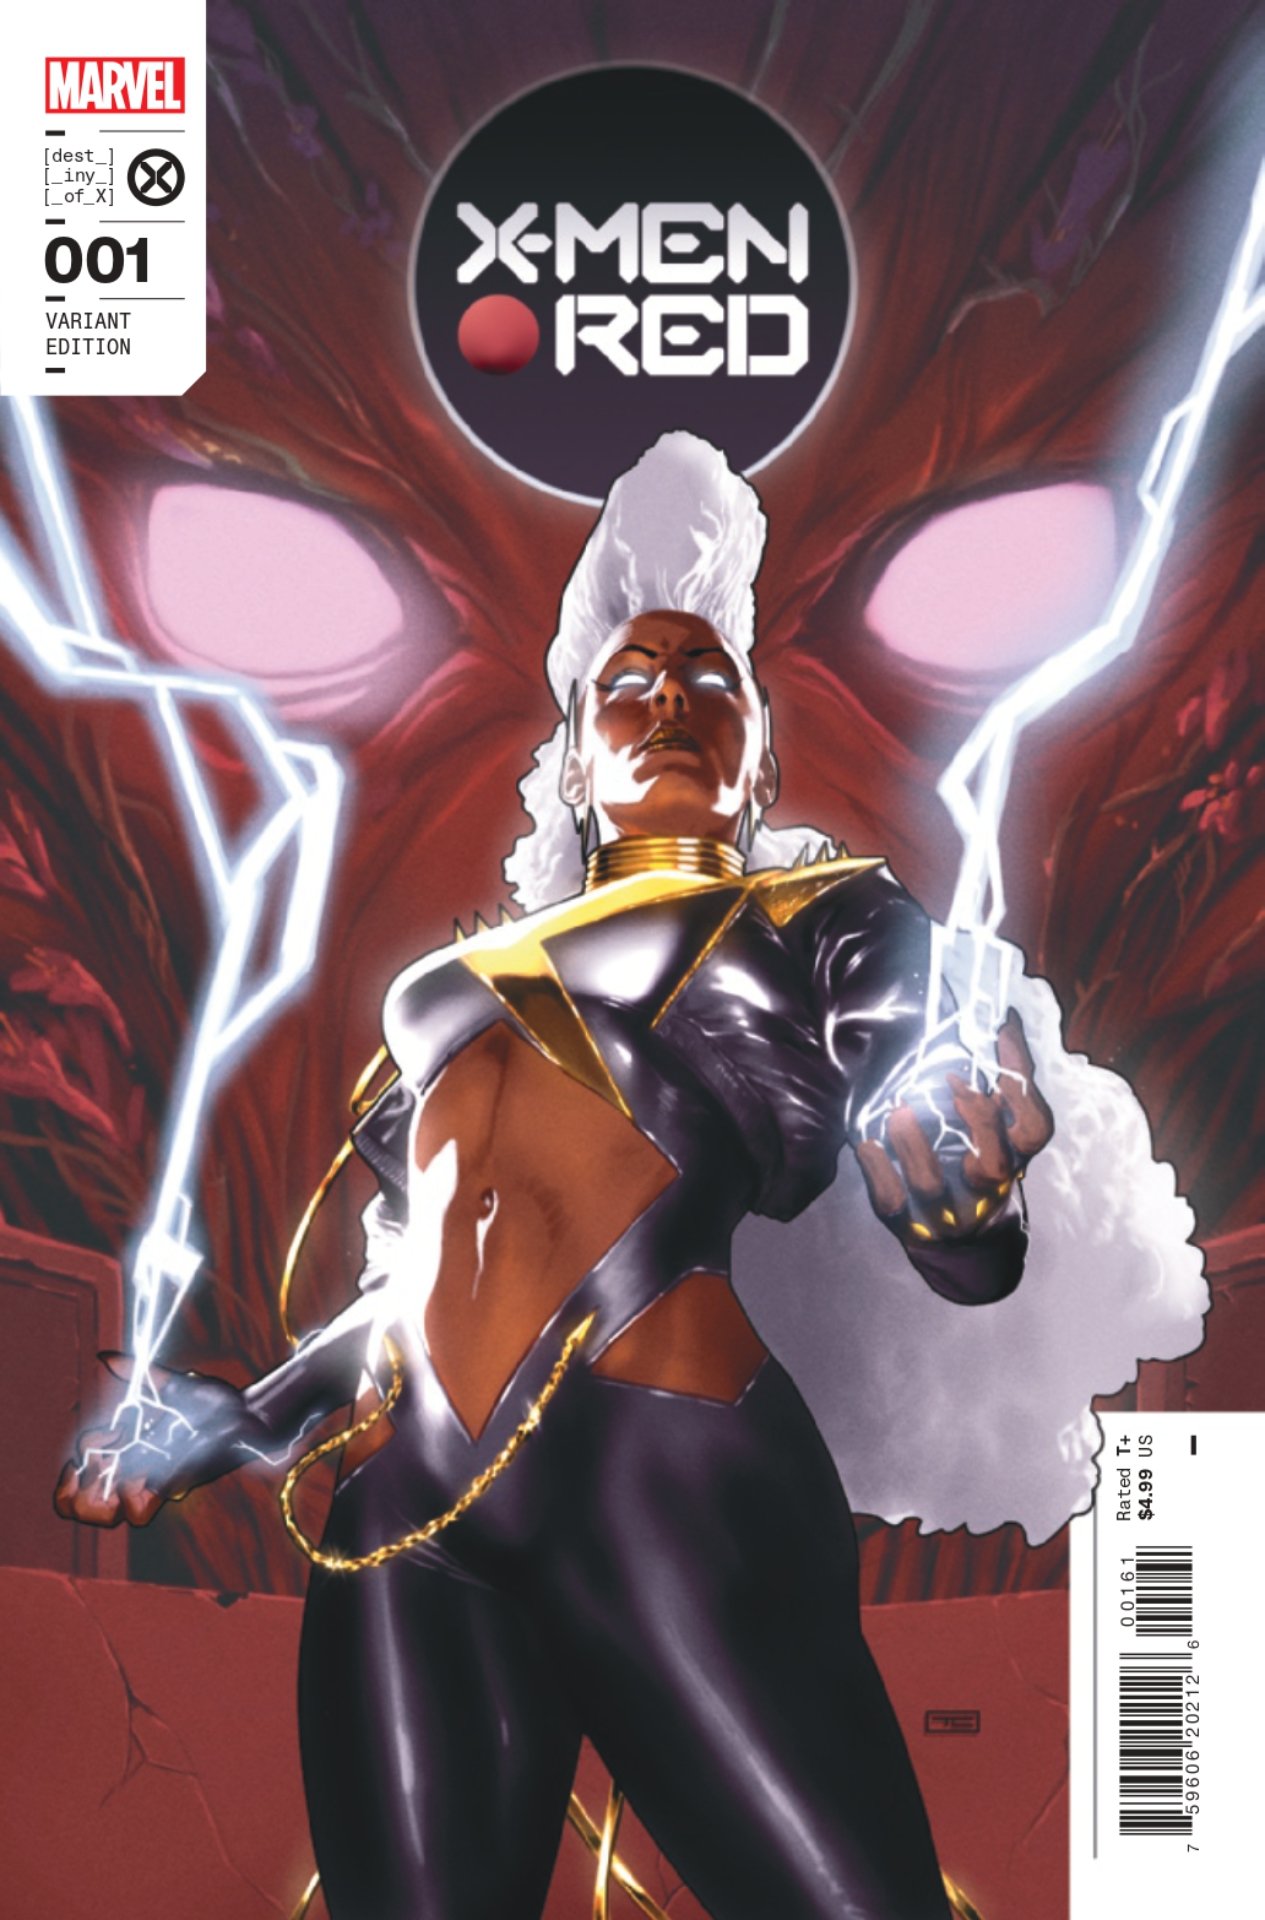 X-Men Red #1 variant covers